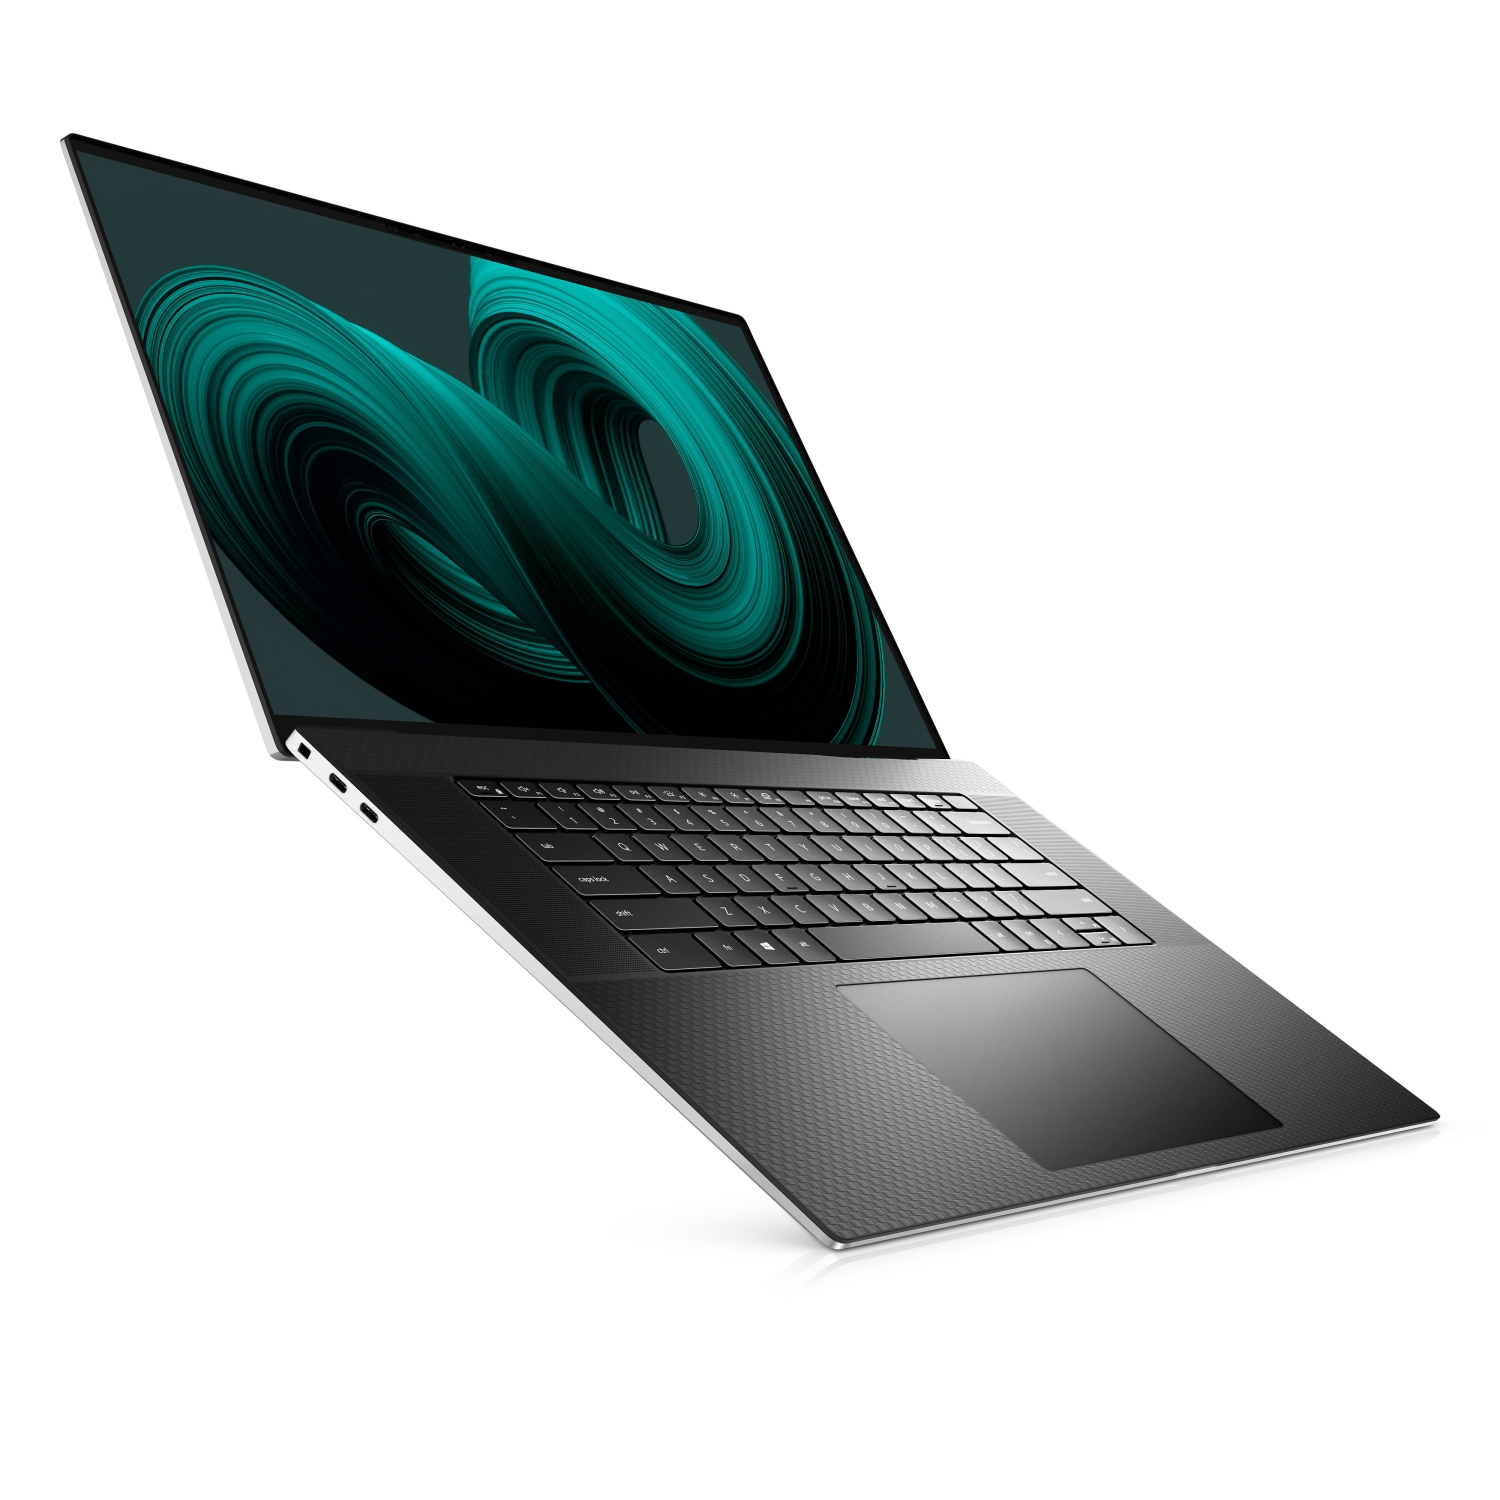 Refurbished (Excellent) - Dell XPS 17 9710 Laptop (2021) | 17" FHD+ | Core i9 - 2TB SSD - 64GB RAM - RTX 3060 | 8 Cores @ 5 GHz - 11th Gen CPU Certified Refurbished